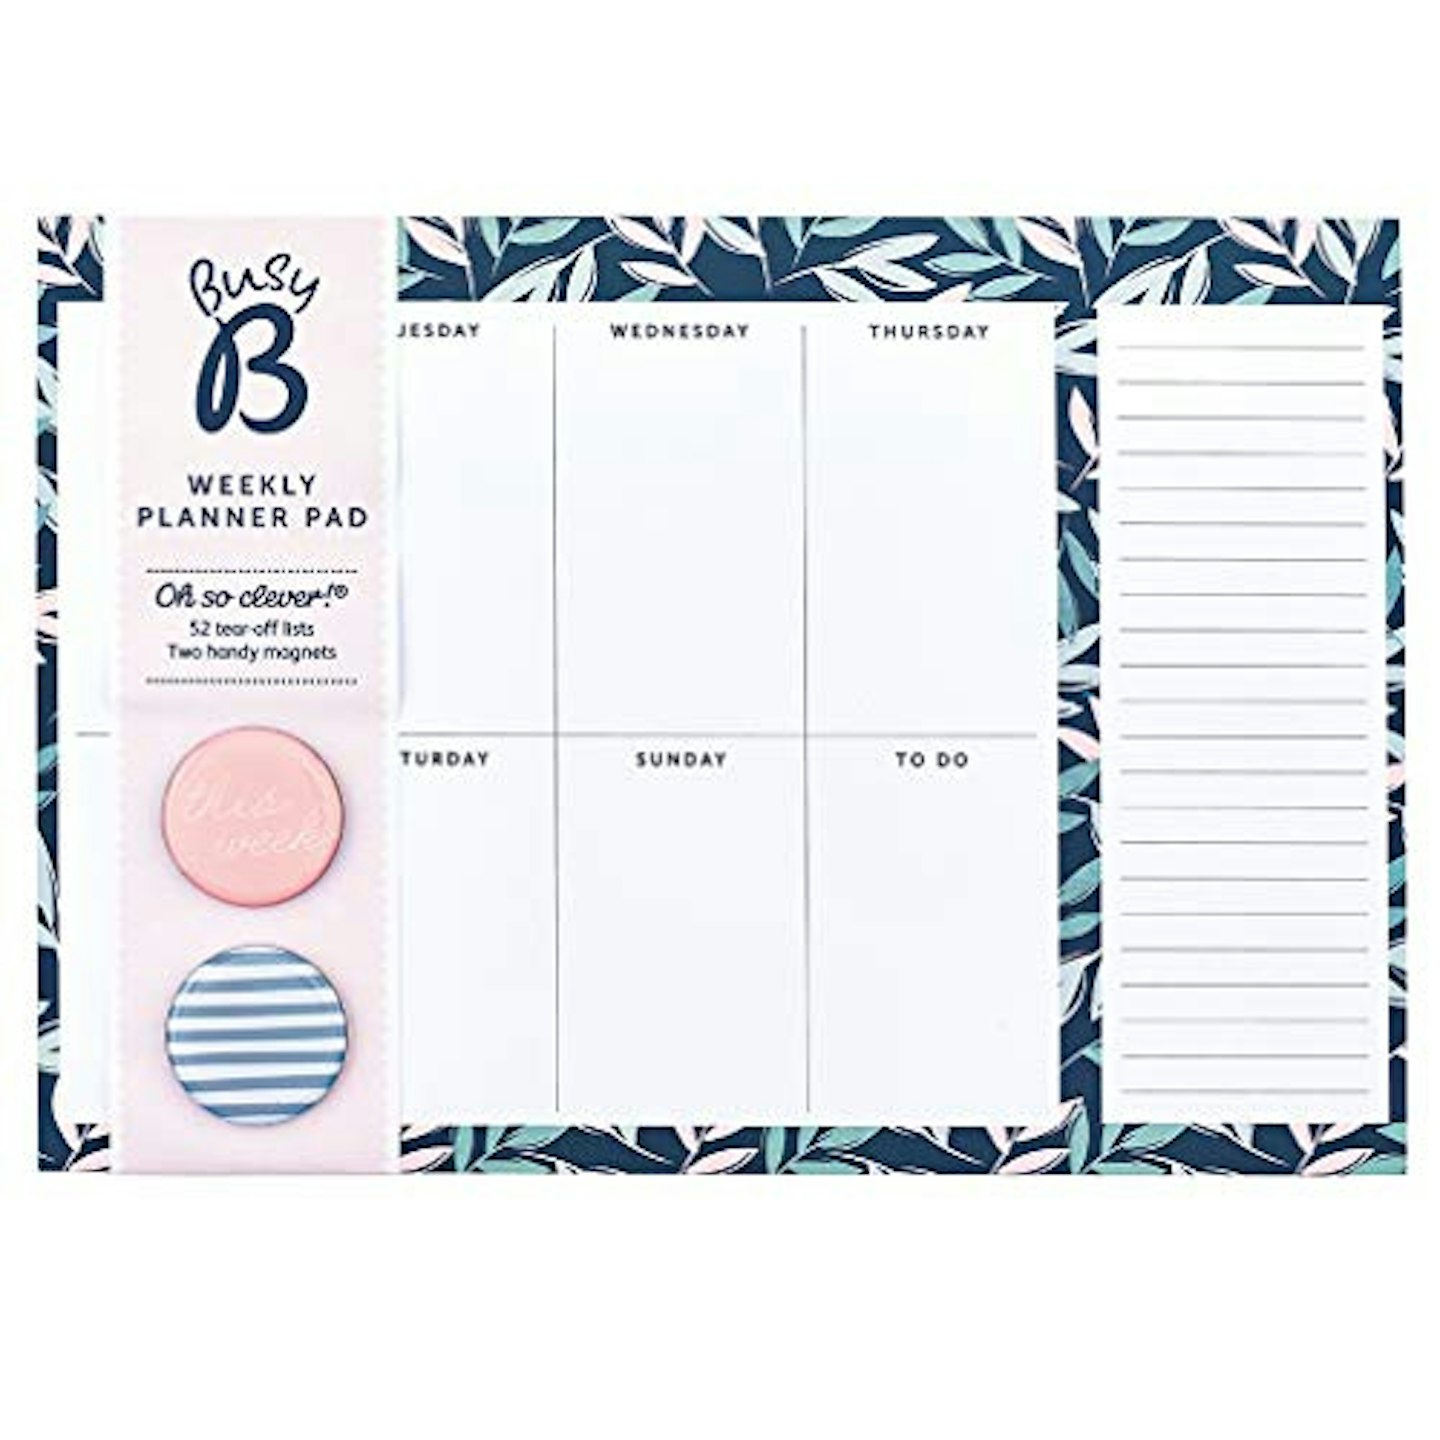 Busy B Weekly Planner Pad - 52 Sheets 